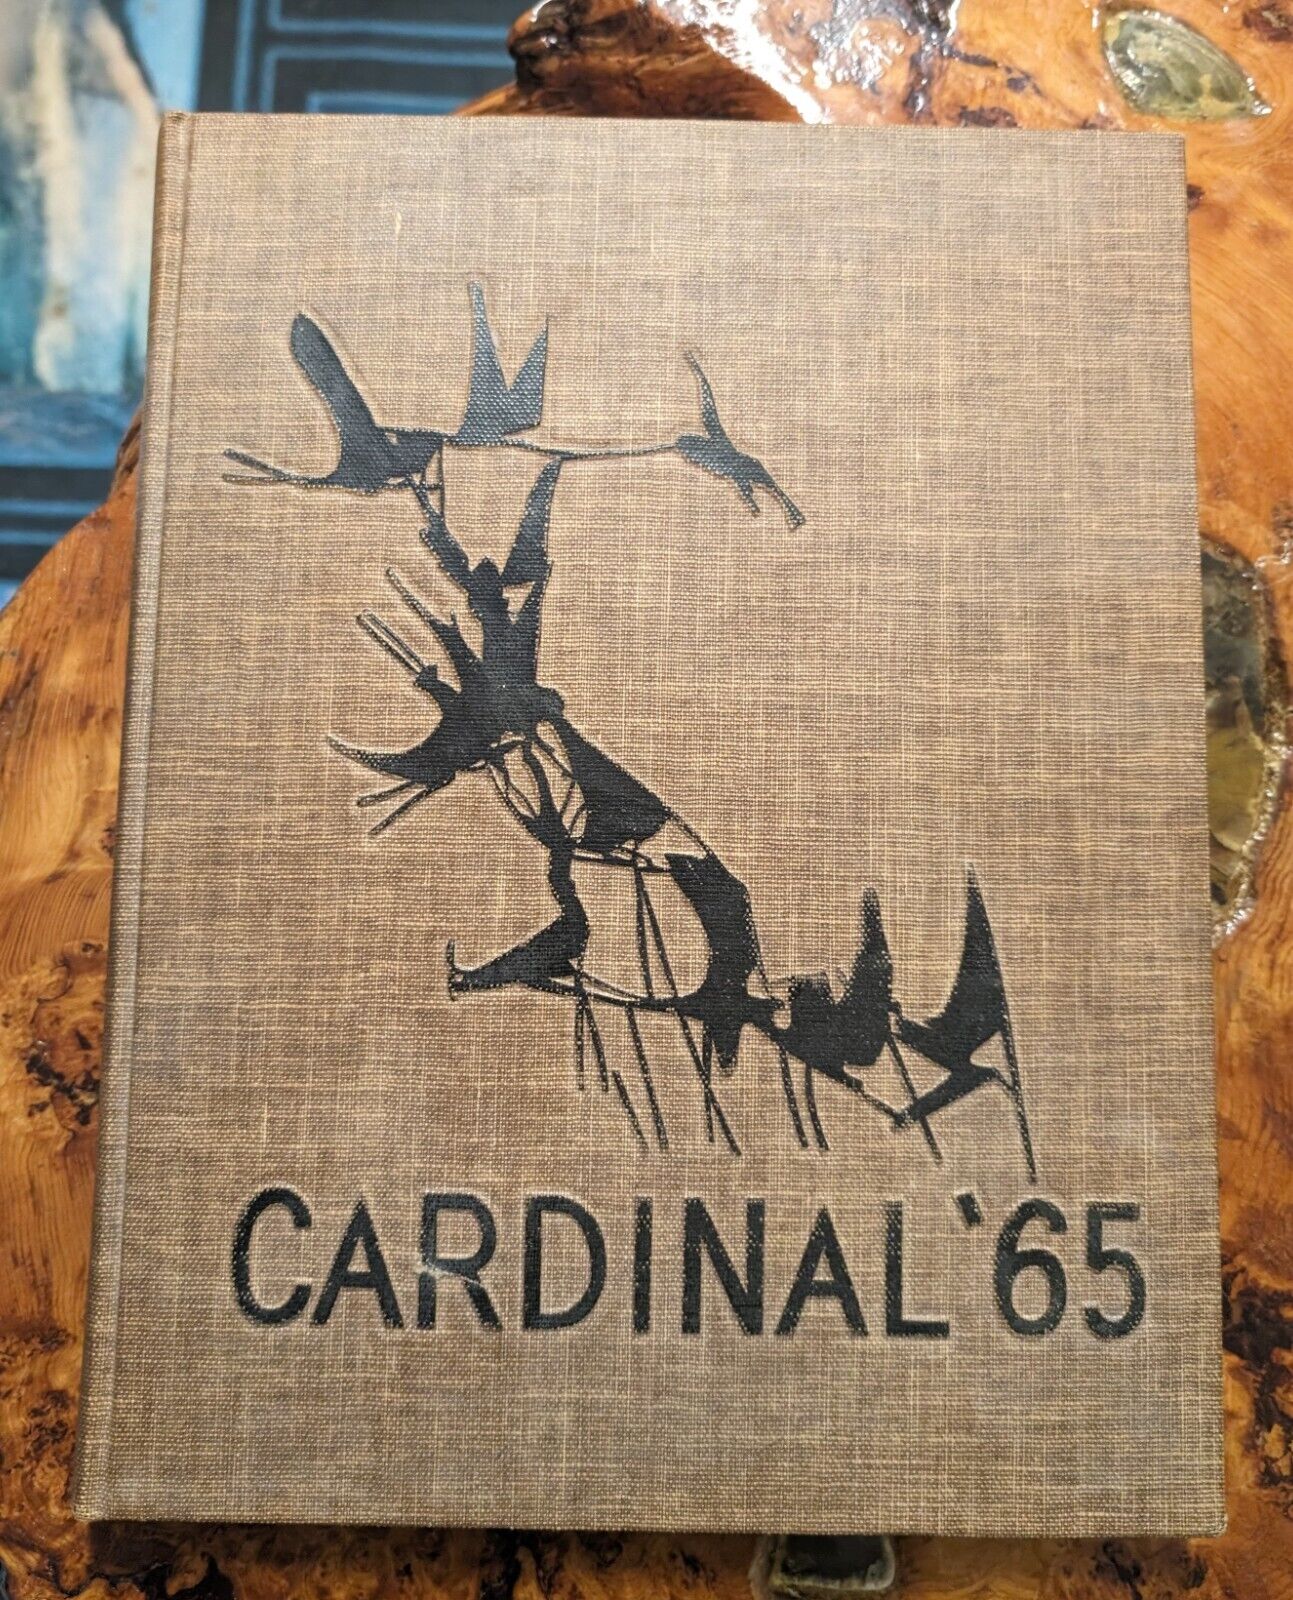 The 1965 Cardinal--Yearbook for Lincoln High School, Portland OR  Nice Condition